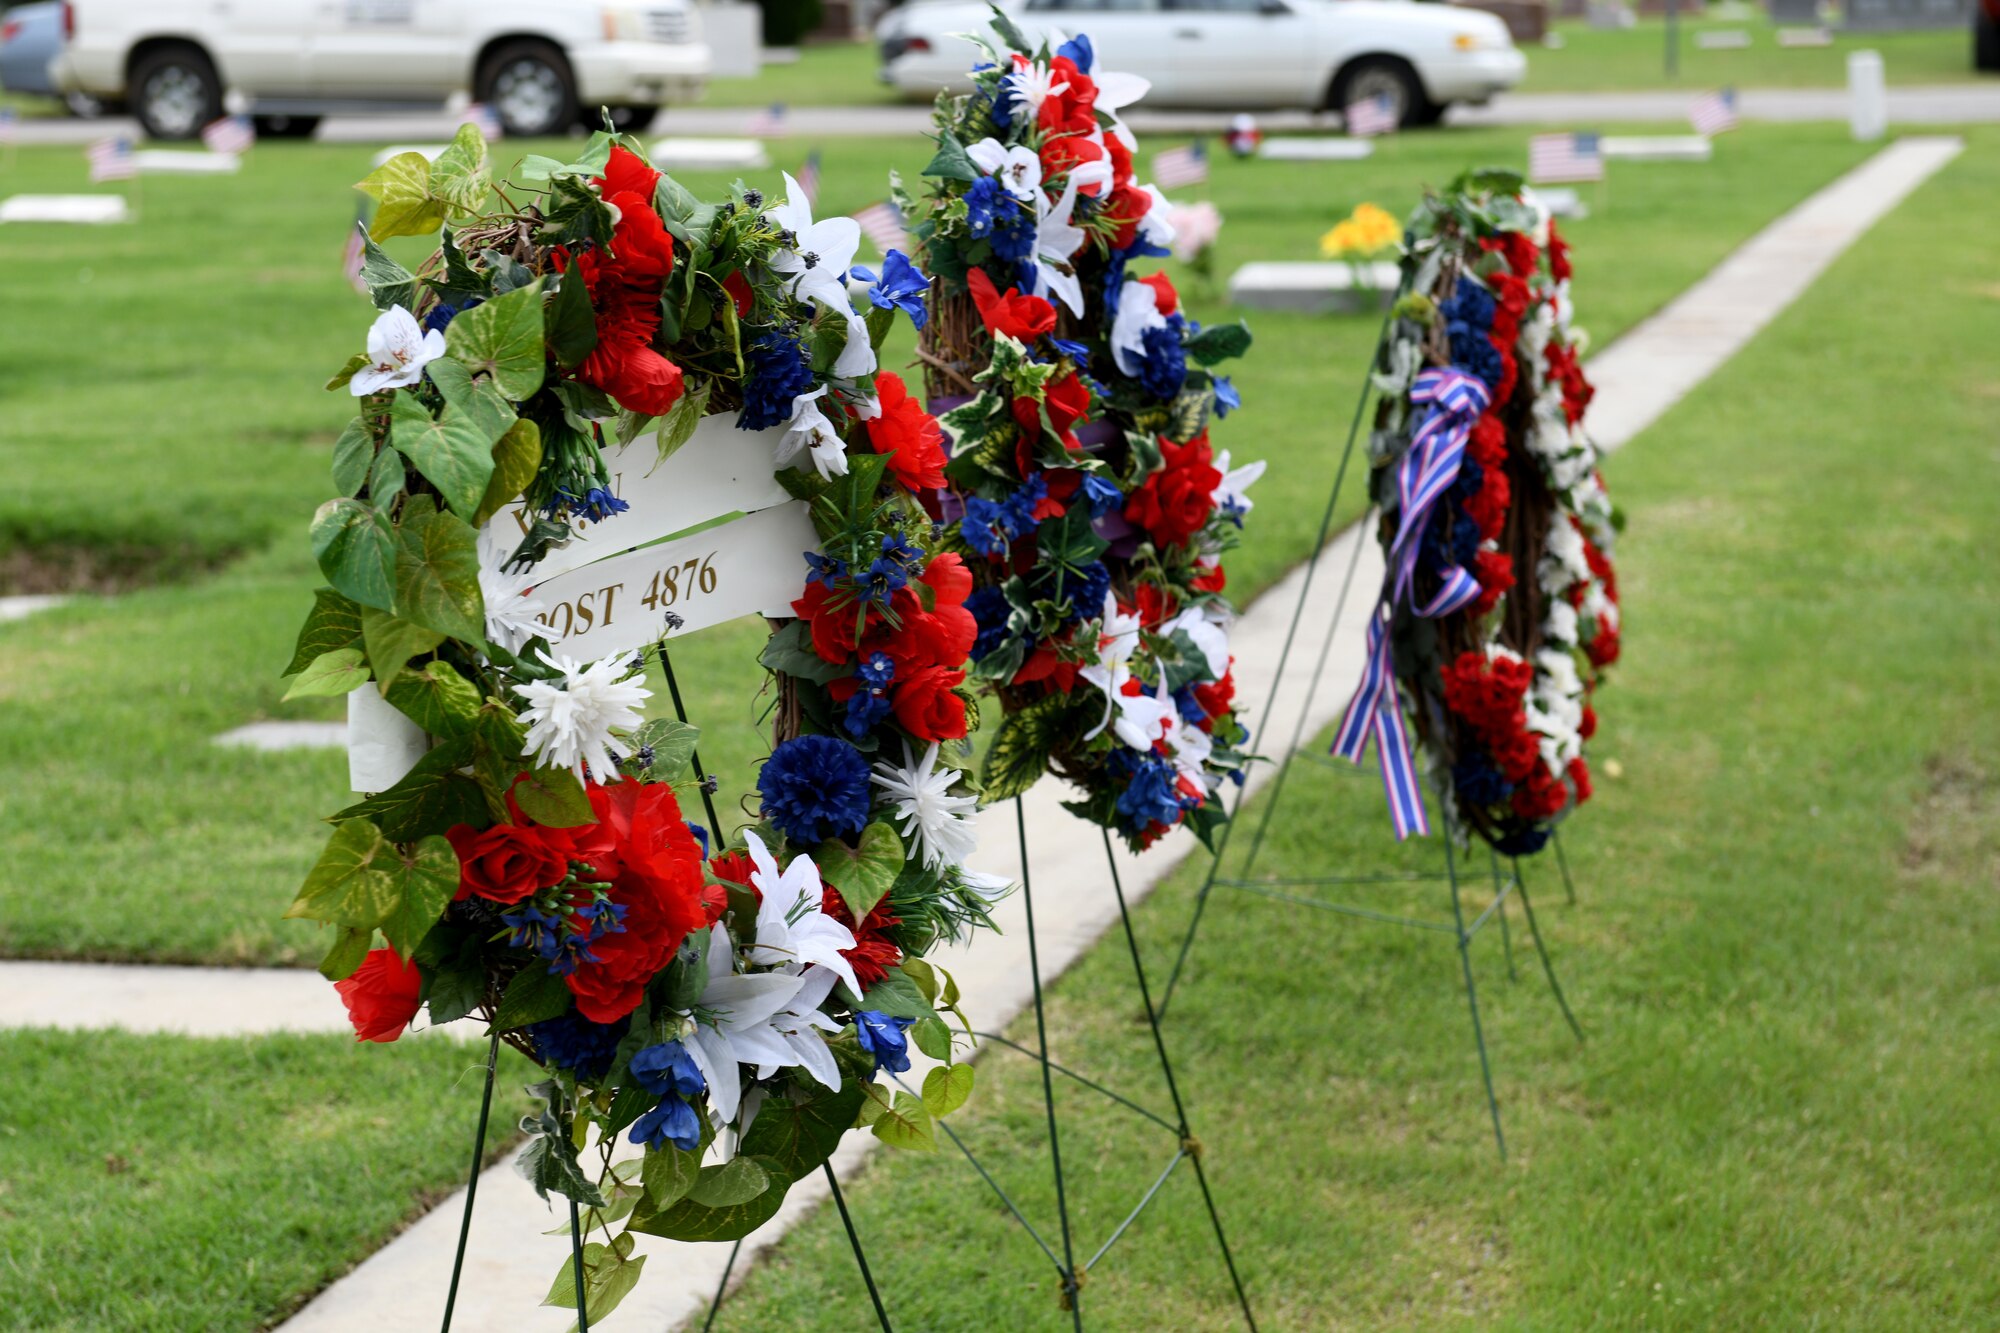 Wreaths are displayed for a crowd on Memorial Day, May 27, 2019, at Altus, Okla. Each year, members from the 97th Air Mobility Wing gather at the Altus City Cemetery and pay their respects to those who served before them.